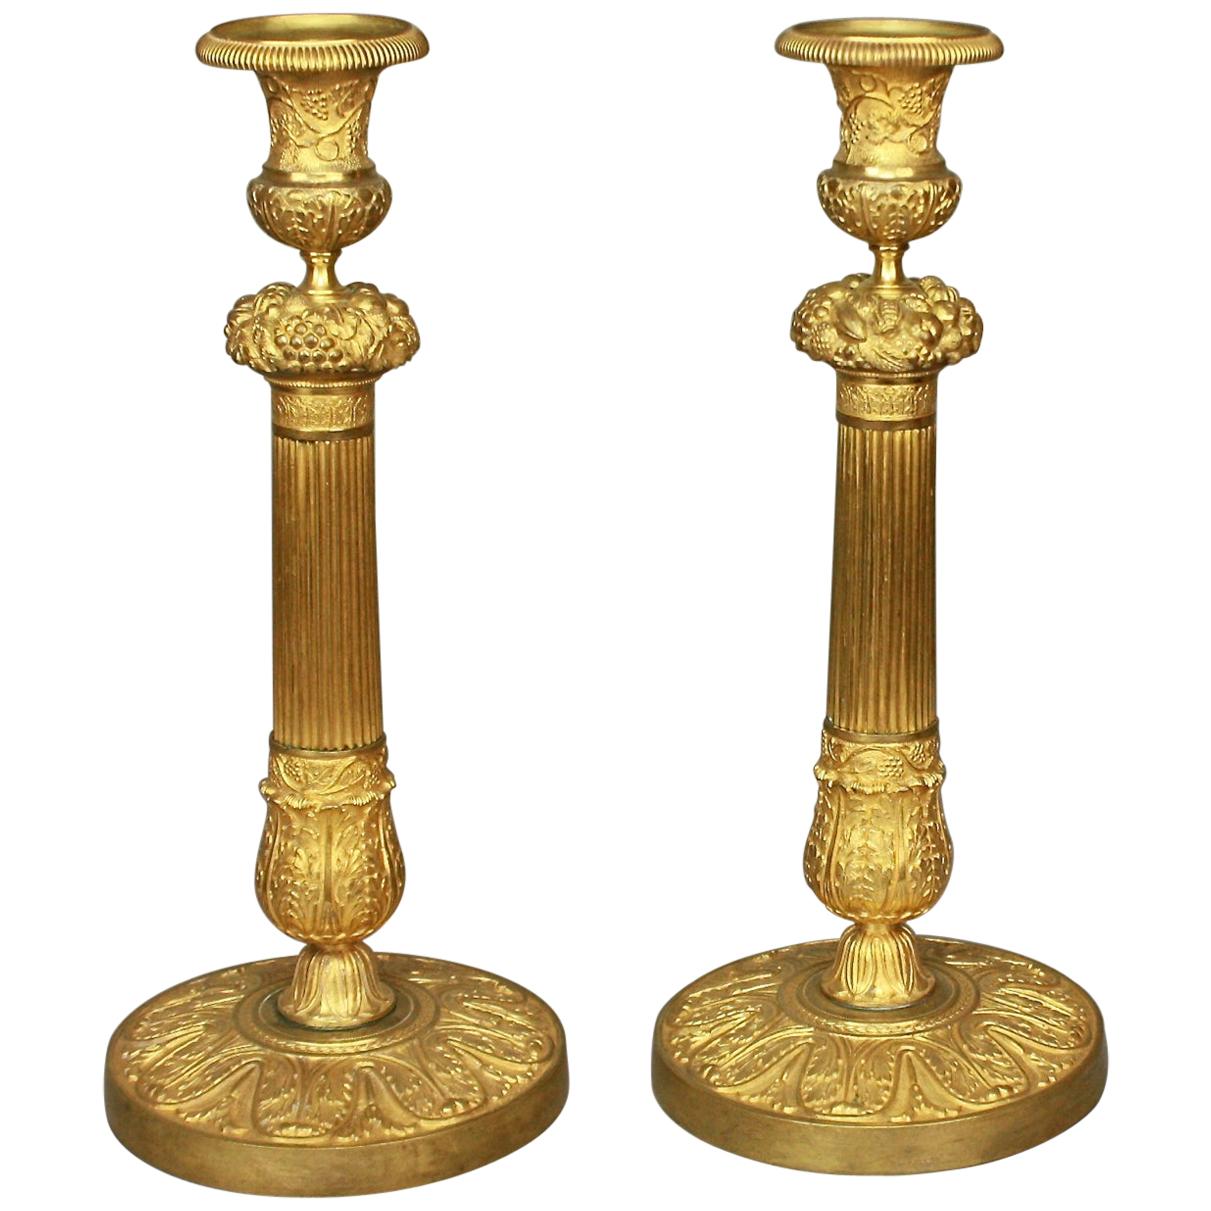 Pair of French Early 19th Century Charles X Gilt-Bronze Candlesticks, circa 1825